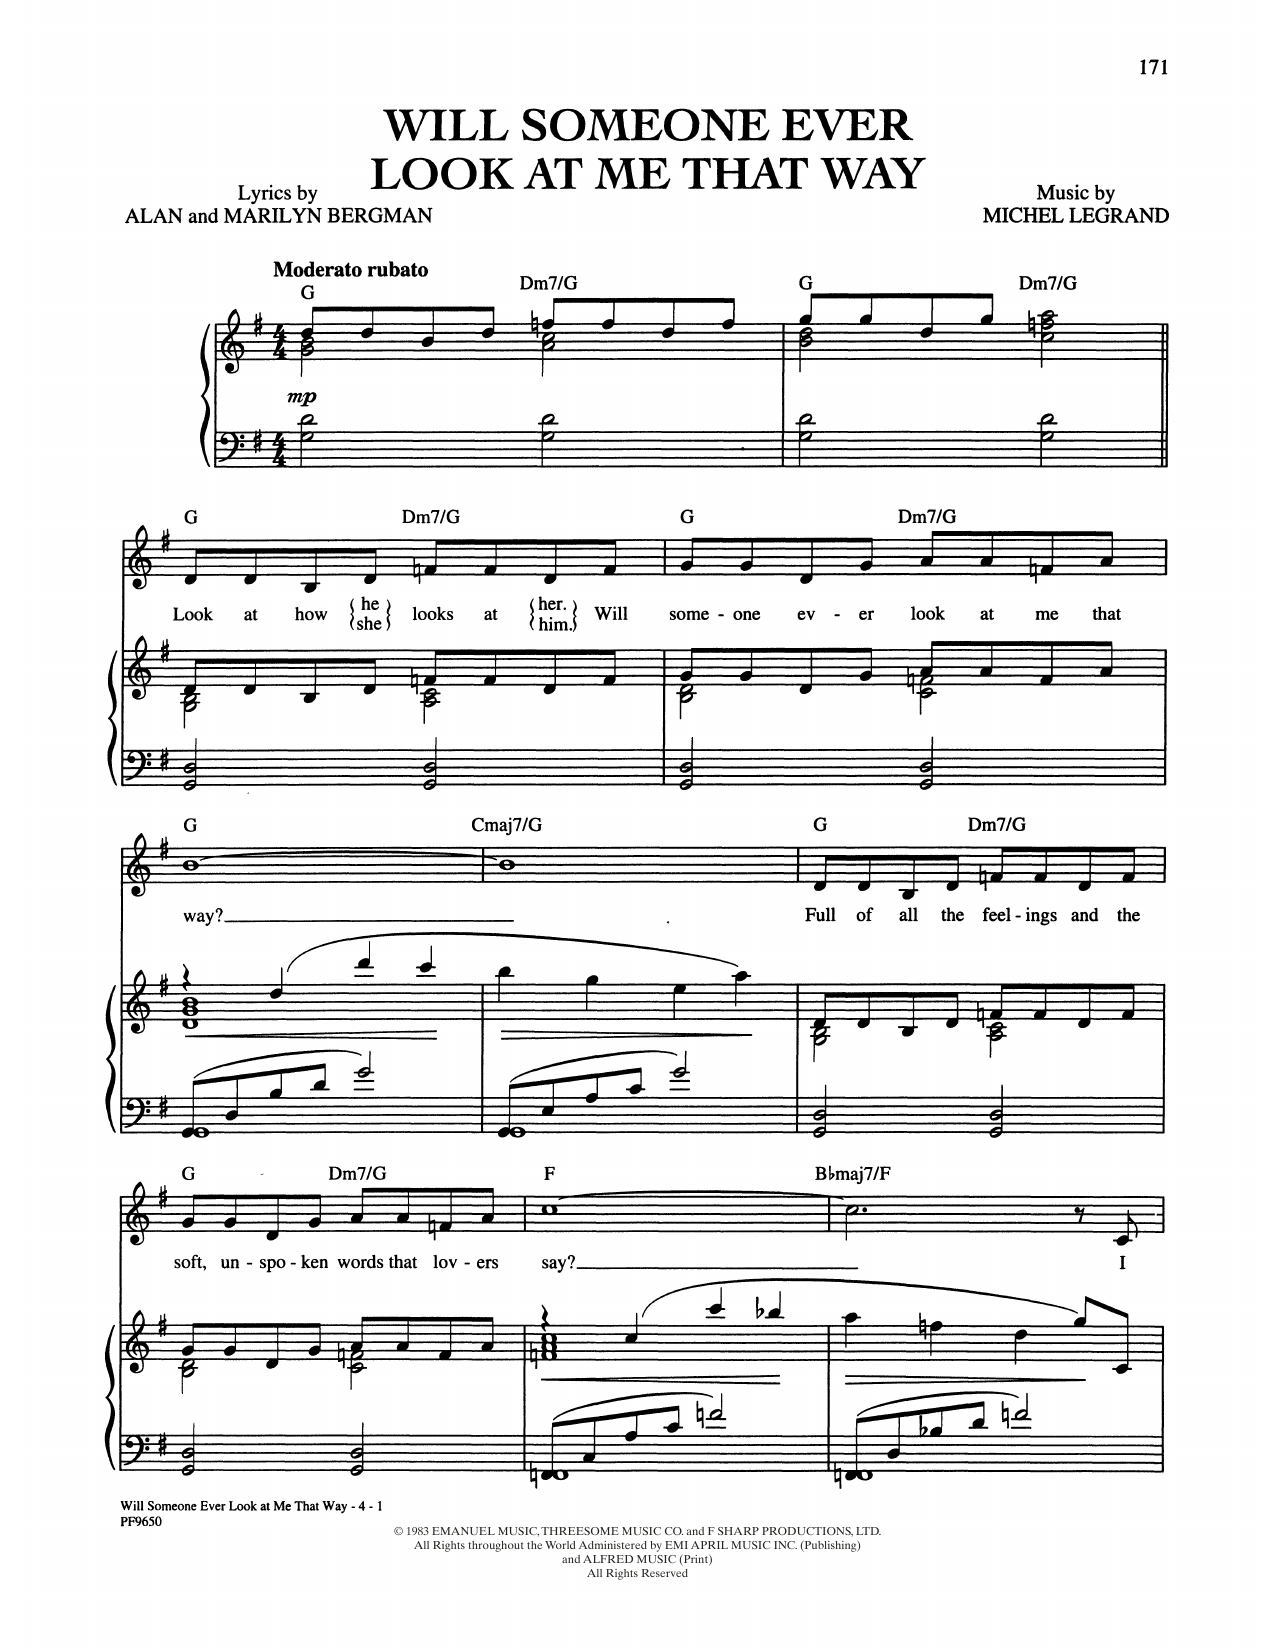 Download Barbra Streisand Will Someone Ever Look At Me That Way? Sheet Music